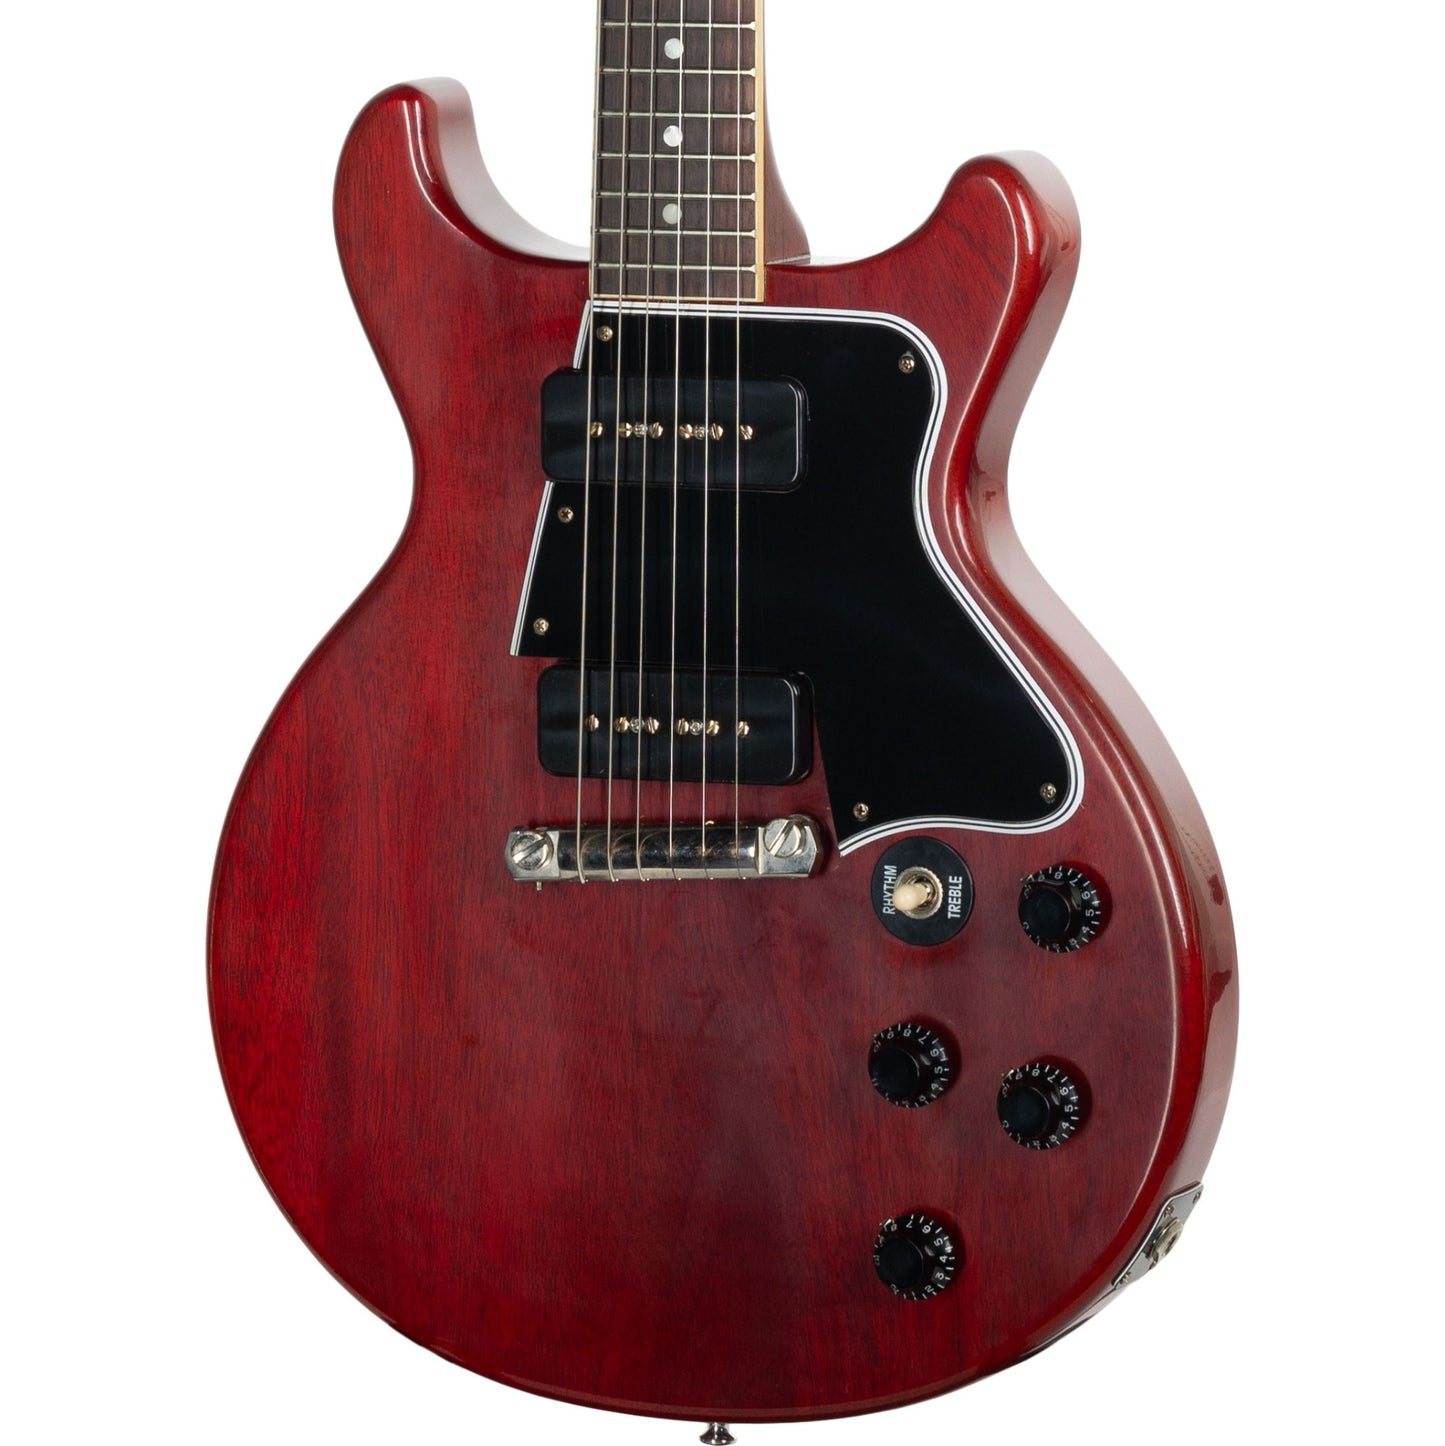 Gibson 1960 Les Paul Special Double Cut Reissue VOS Electric Guitar - Cherry Red